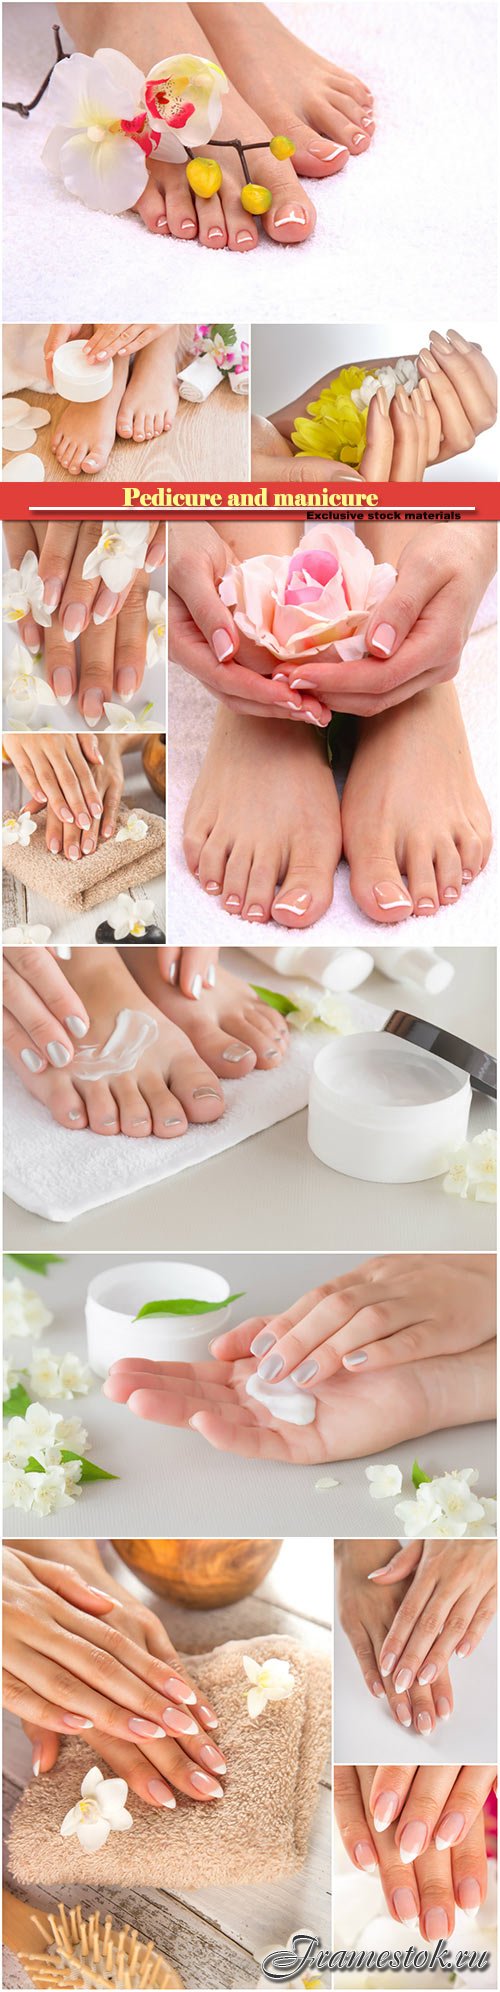 Photo of a beautiful female feet with pedicure and manicure